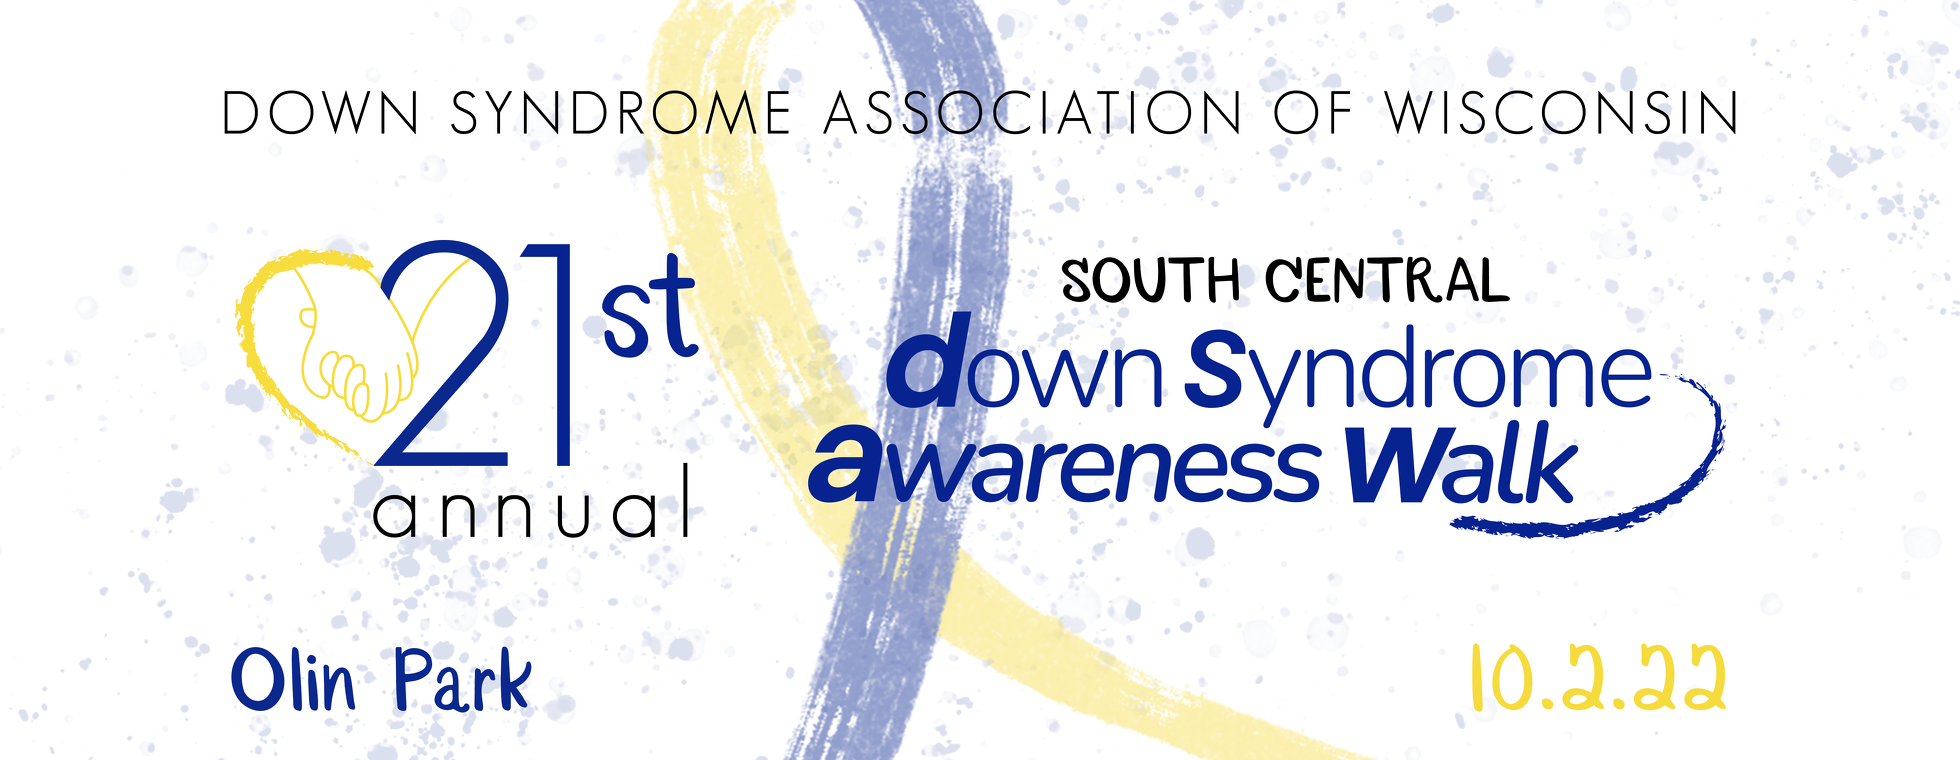 21st Annual DSAW-South Central Down Syndrome Awareness Walk 